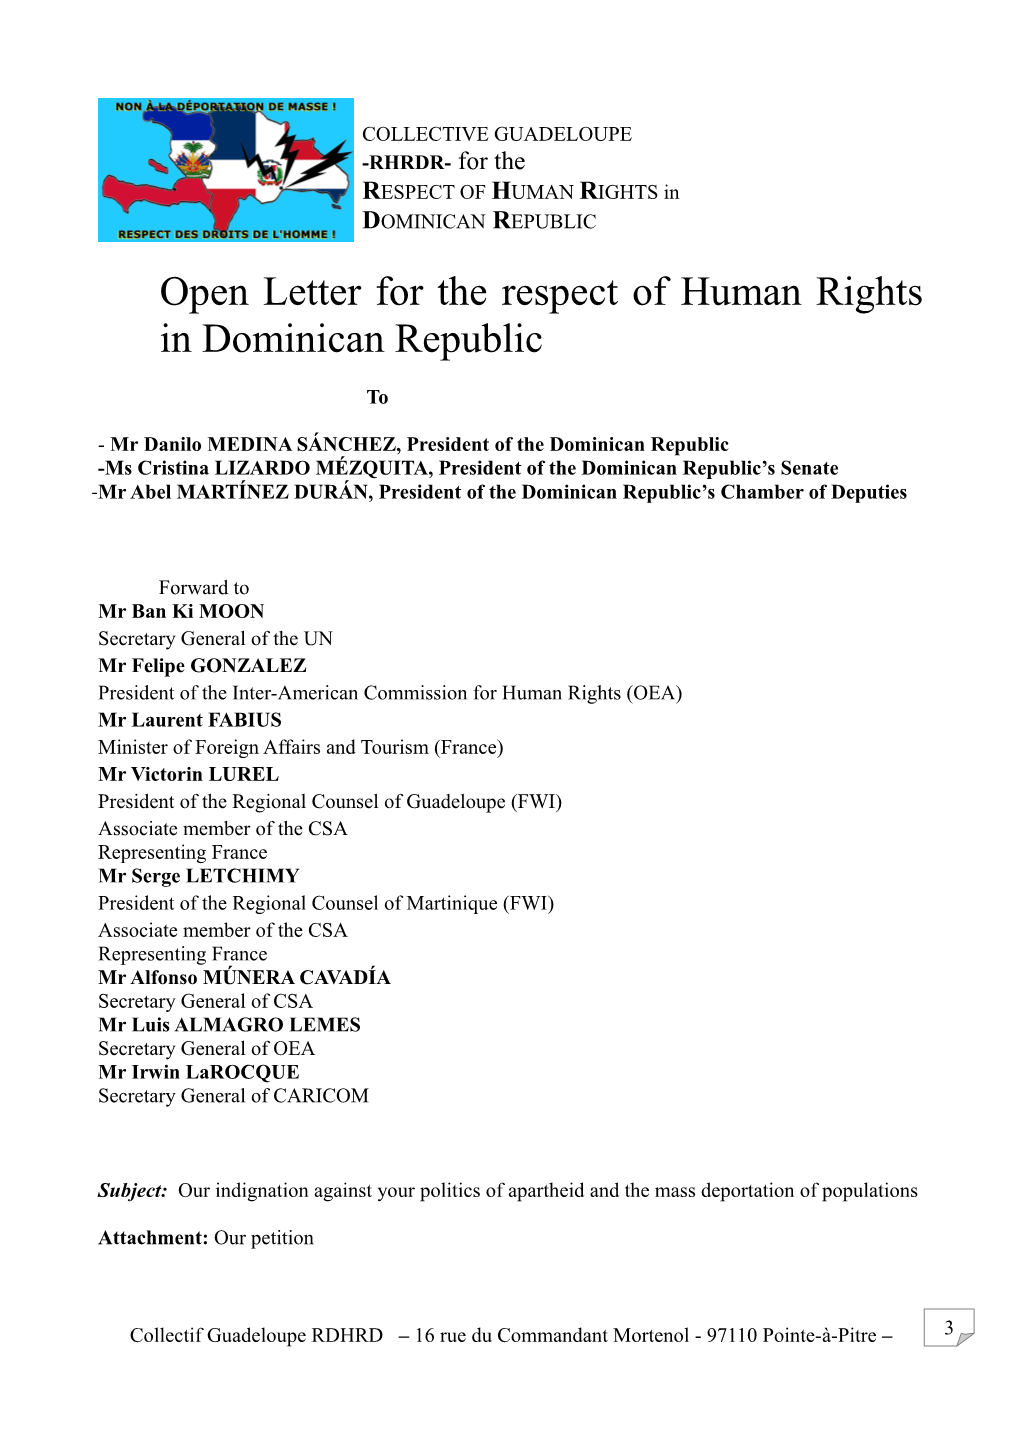 Open Letter for the Respect of Human Rights in Dominican Republic